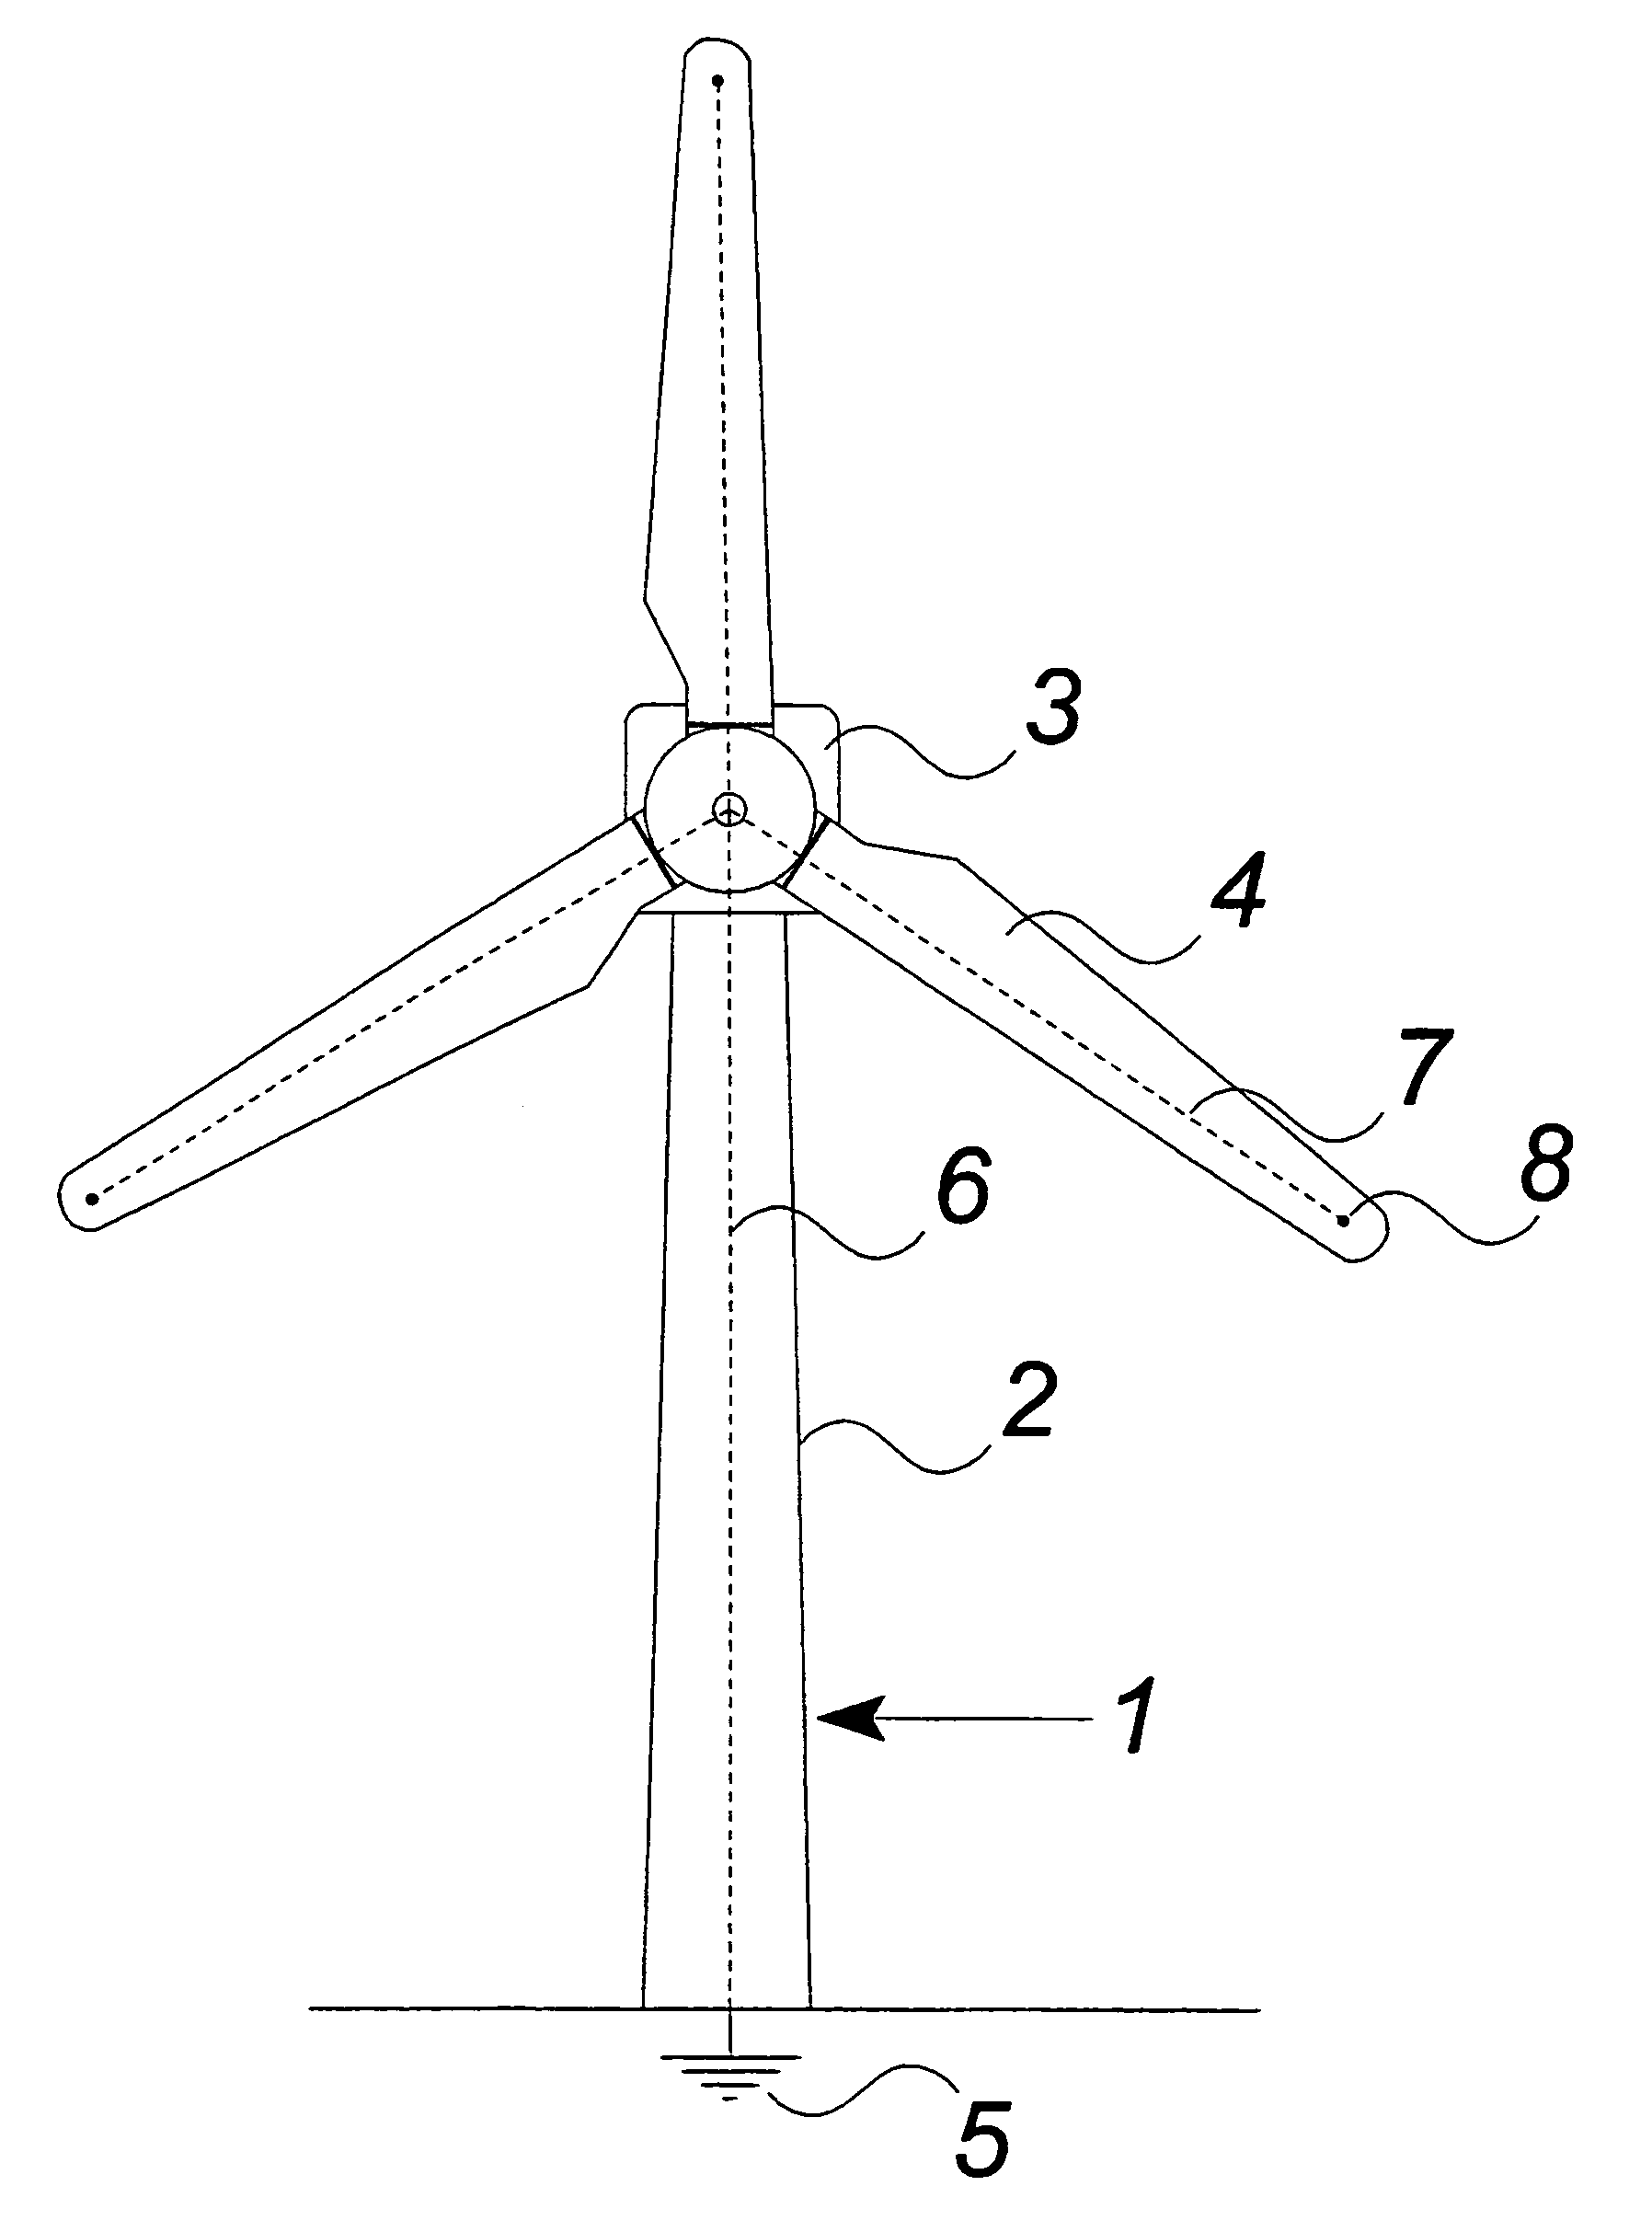 Lightning protection system for a construction, method of creating a lightning protection system and use thereof